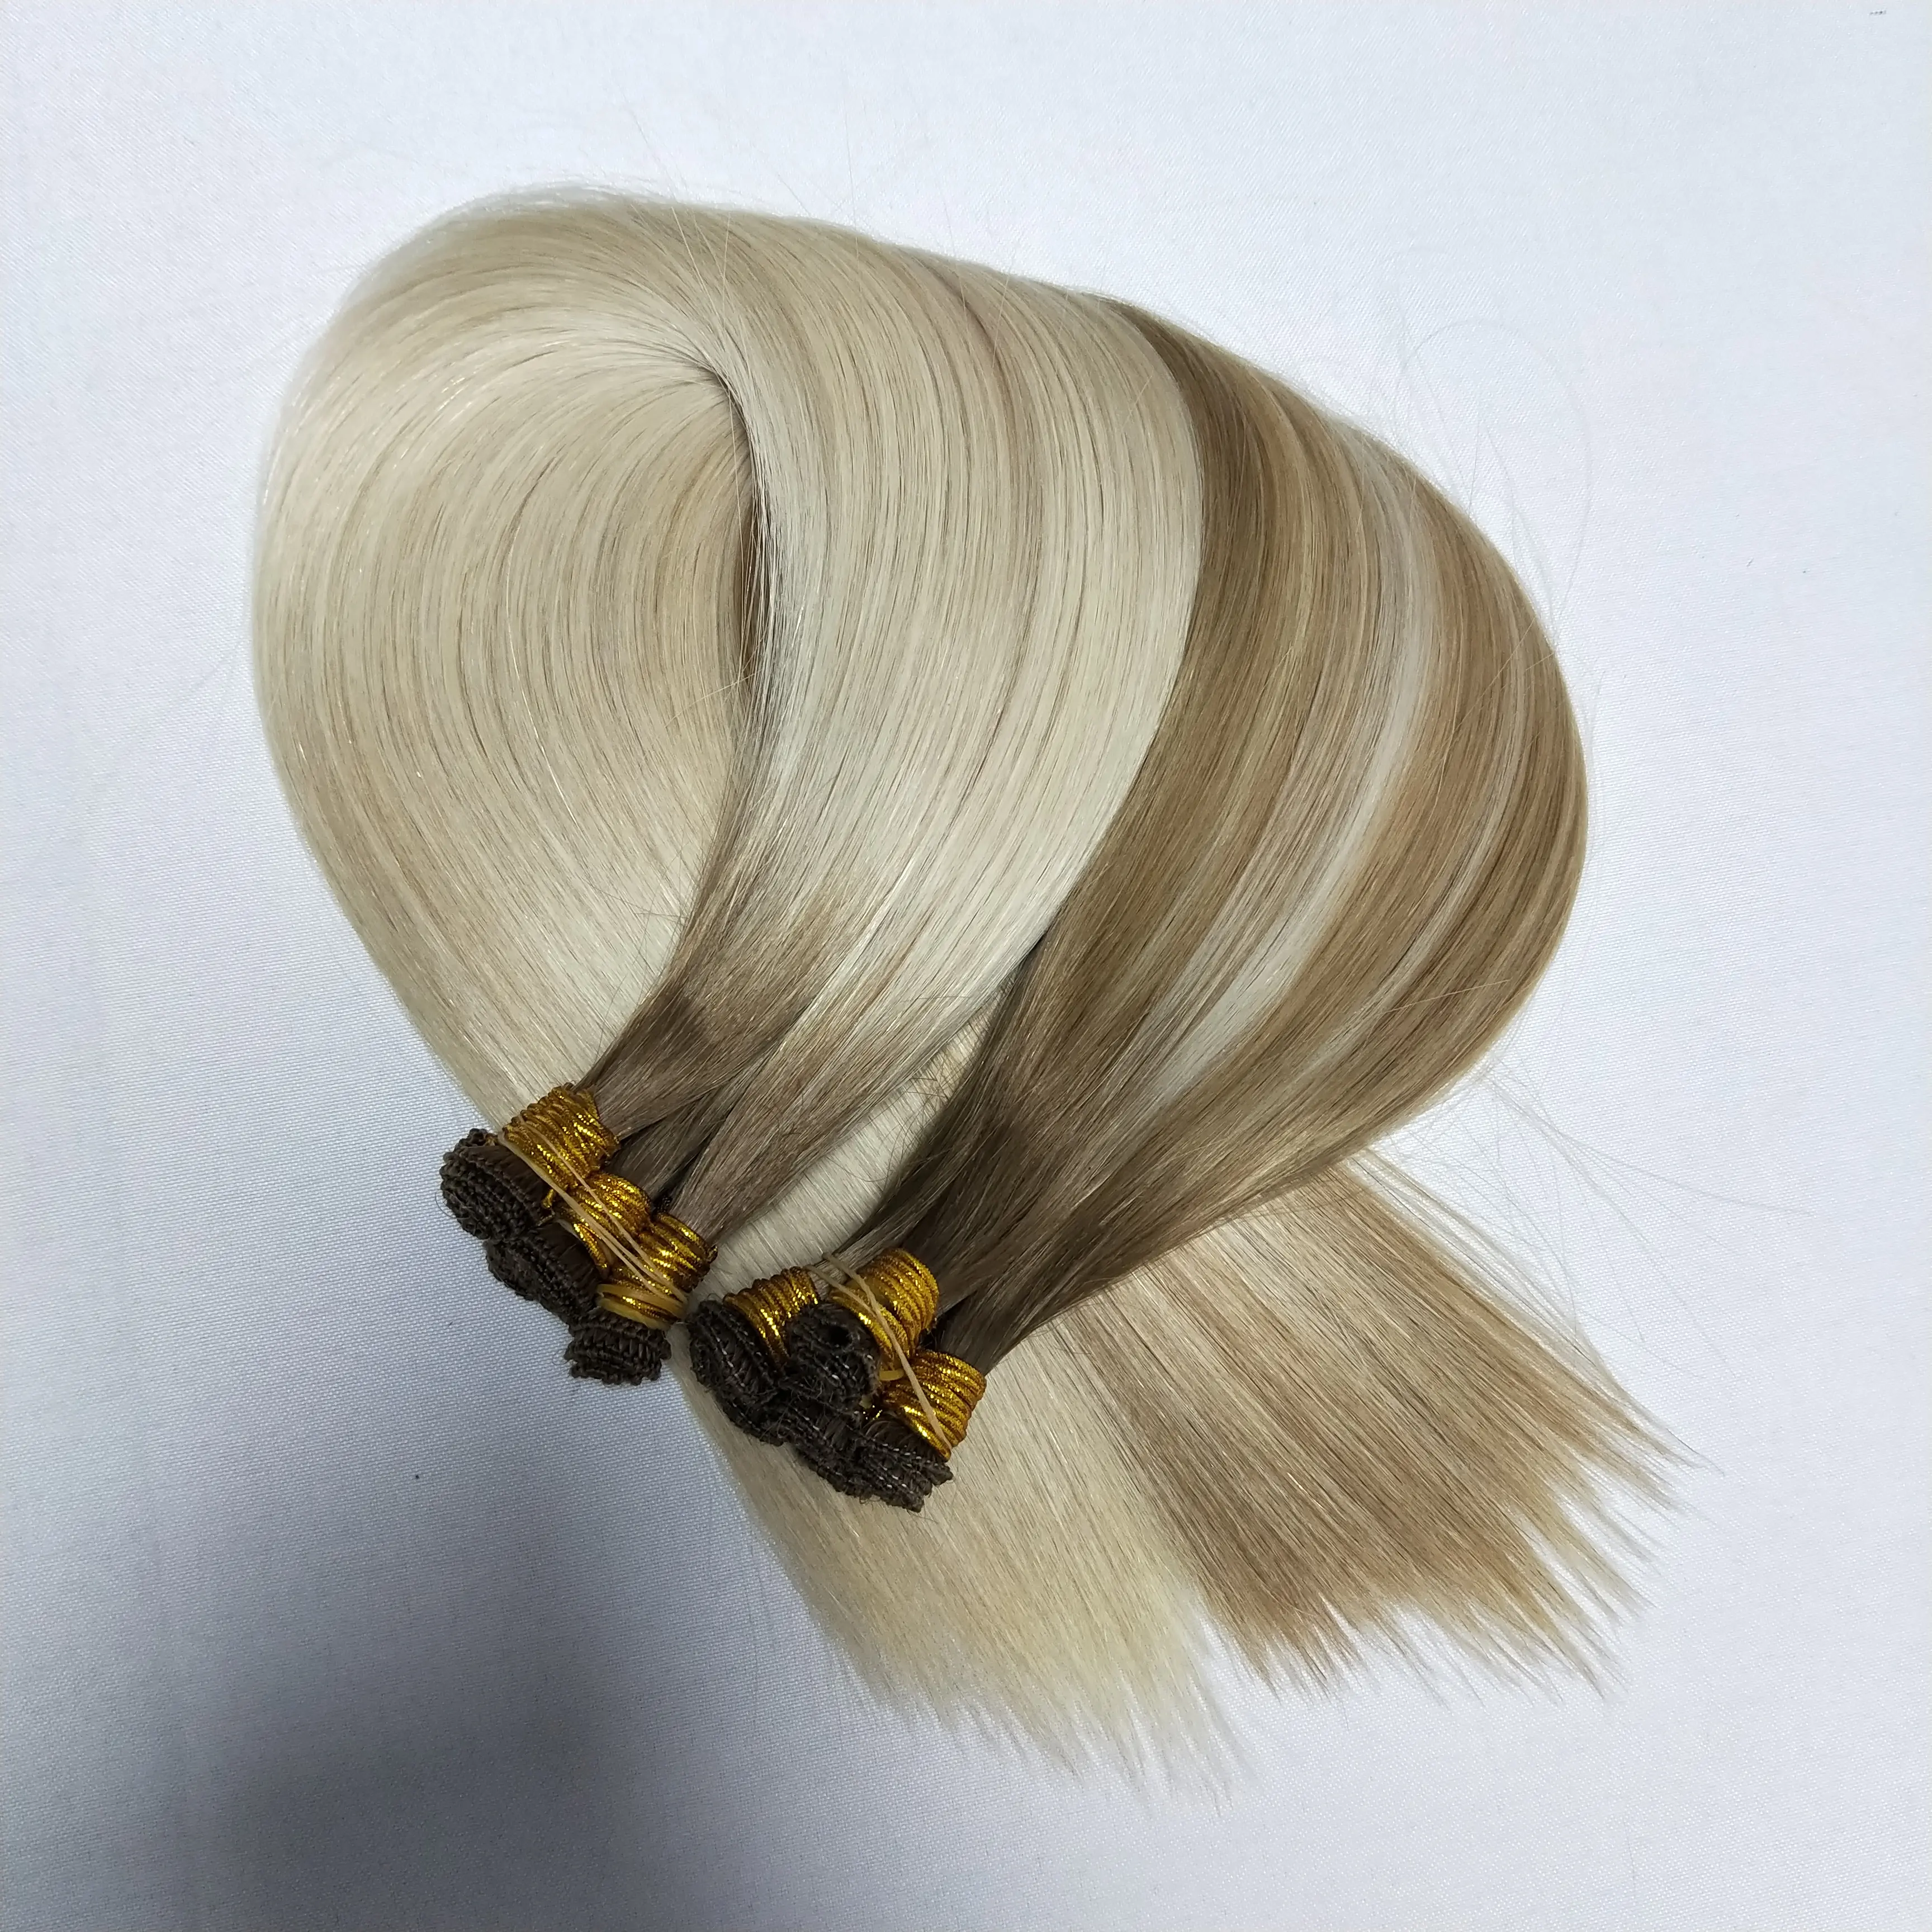 Slavic Blond Human Hair Extensions Full Pack 120g Hand Made Weft Russian handtied weft Hair Extensions